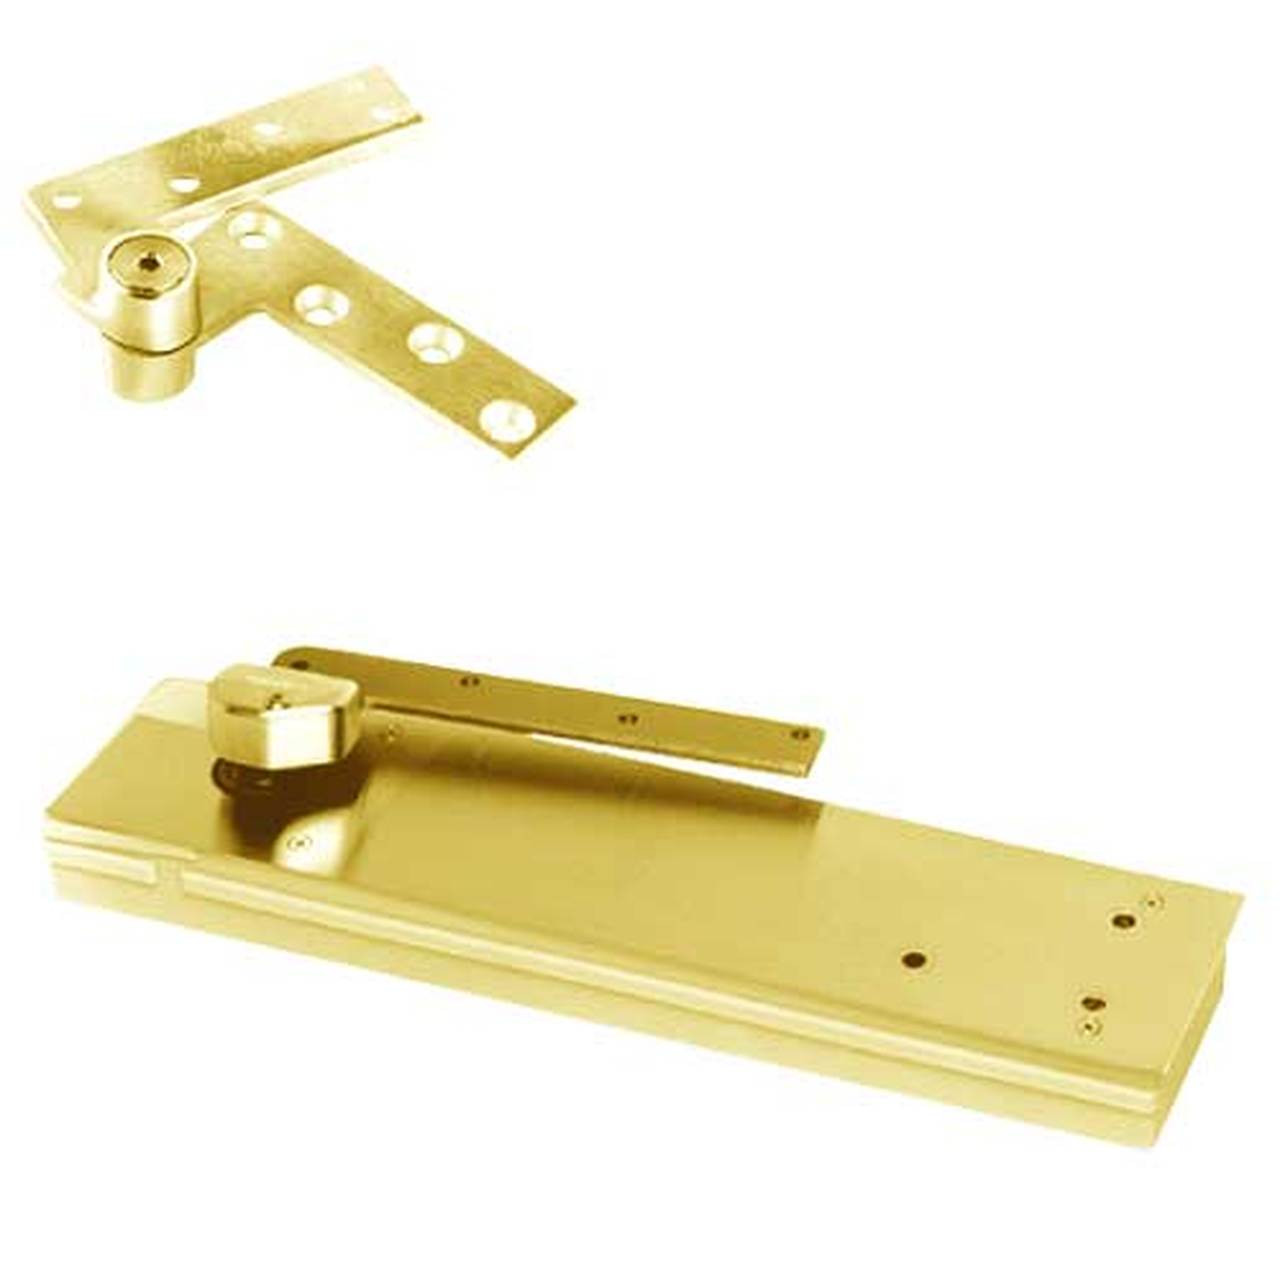 FHM5104NBC-LH-605 Rixson HM51 Series 3/4" Offset Hung Shallow Depth Floor Closers in Bright Brass Finish